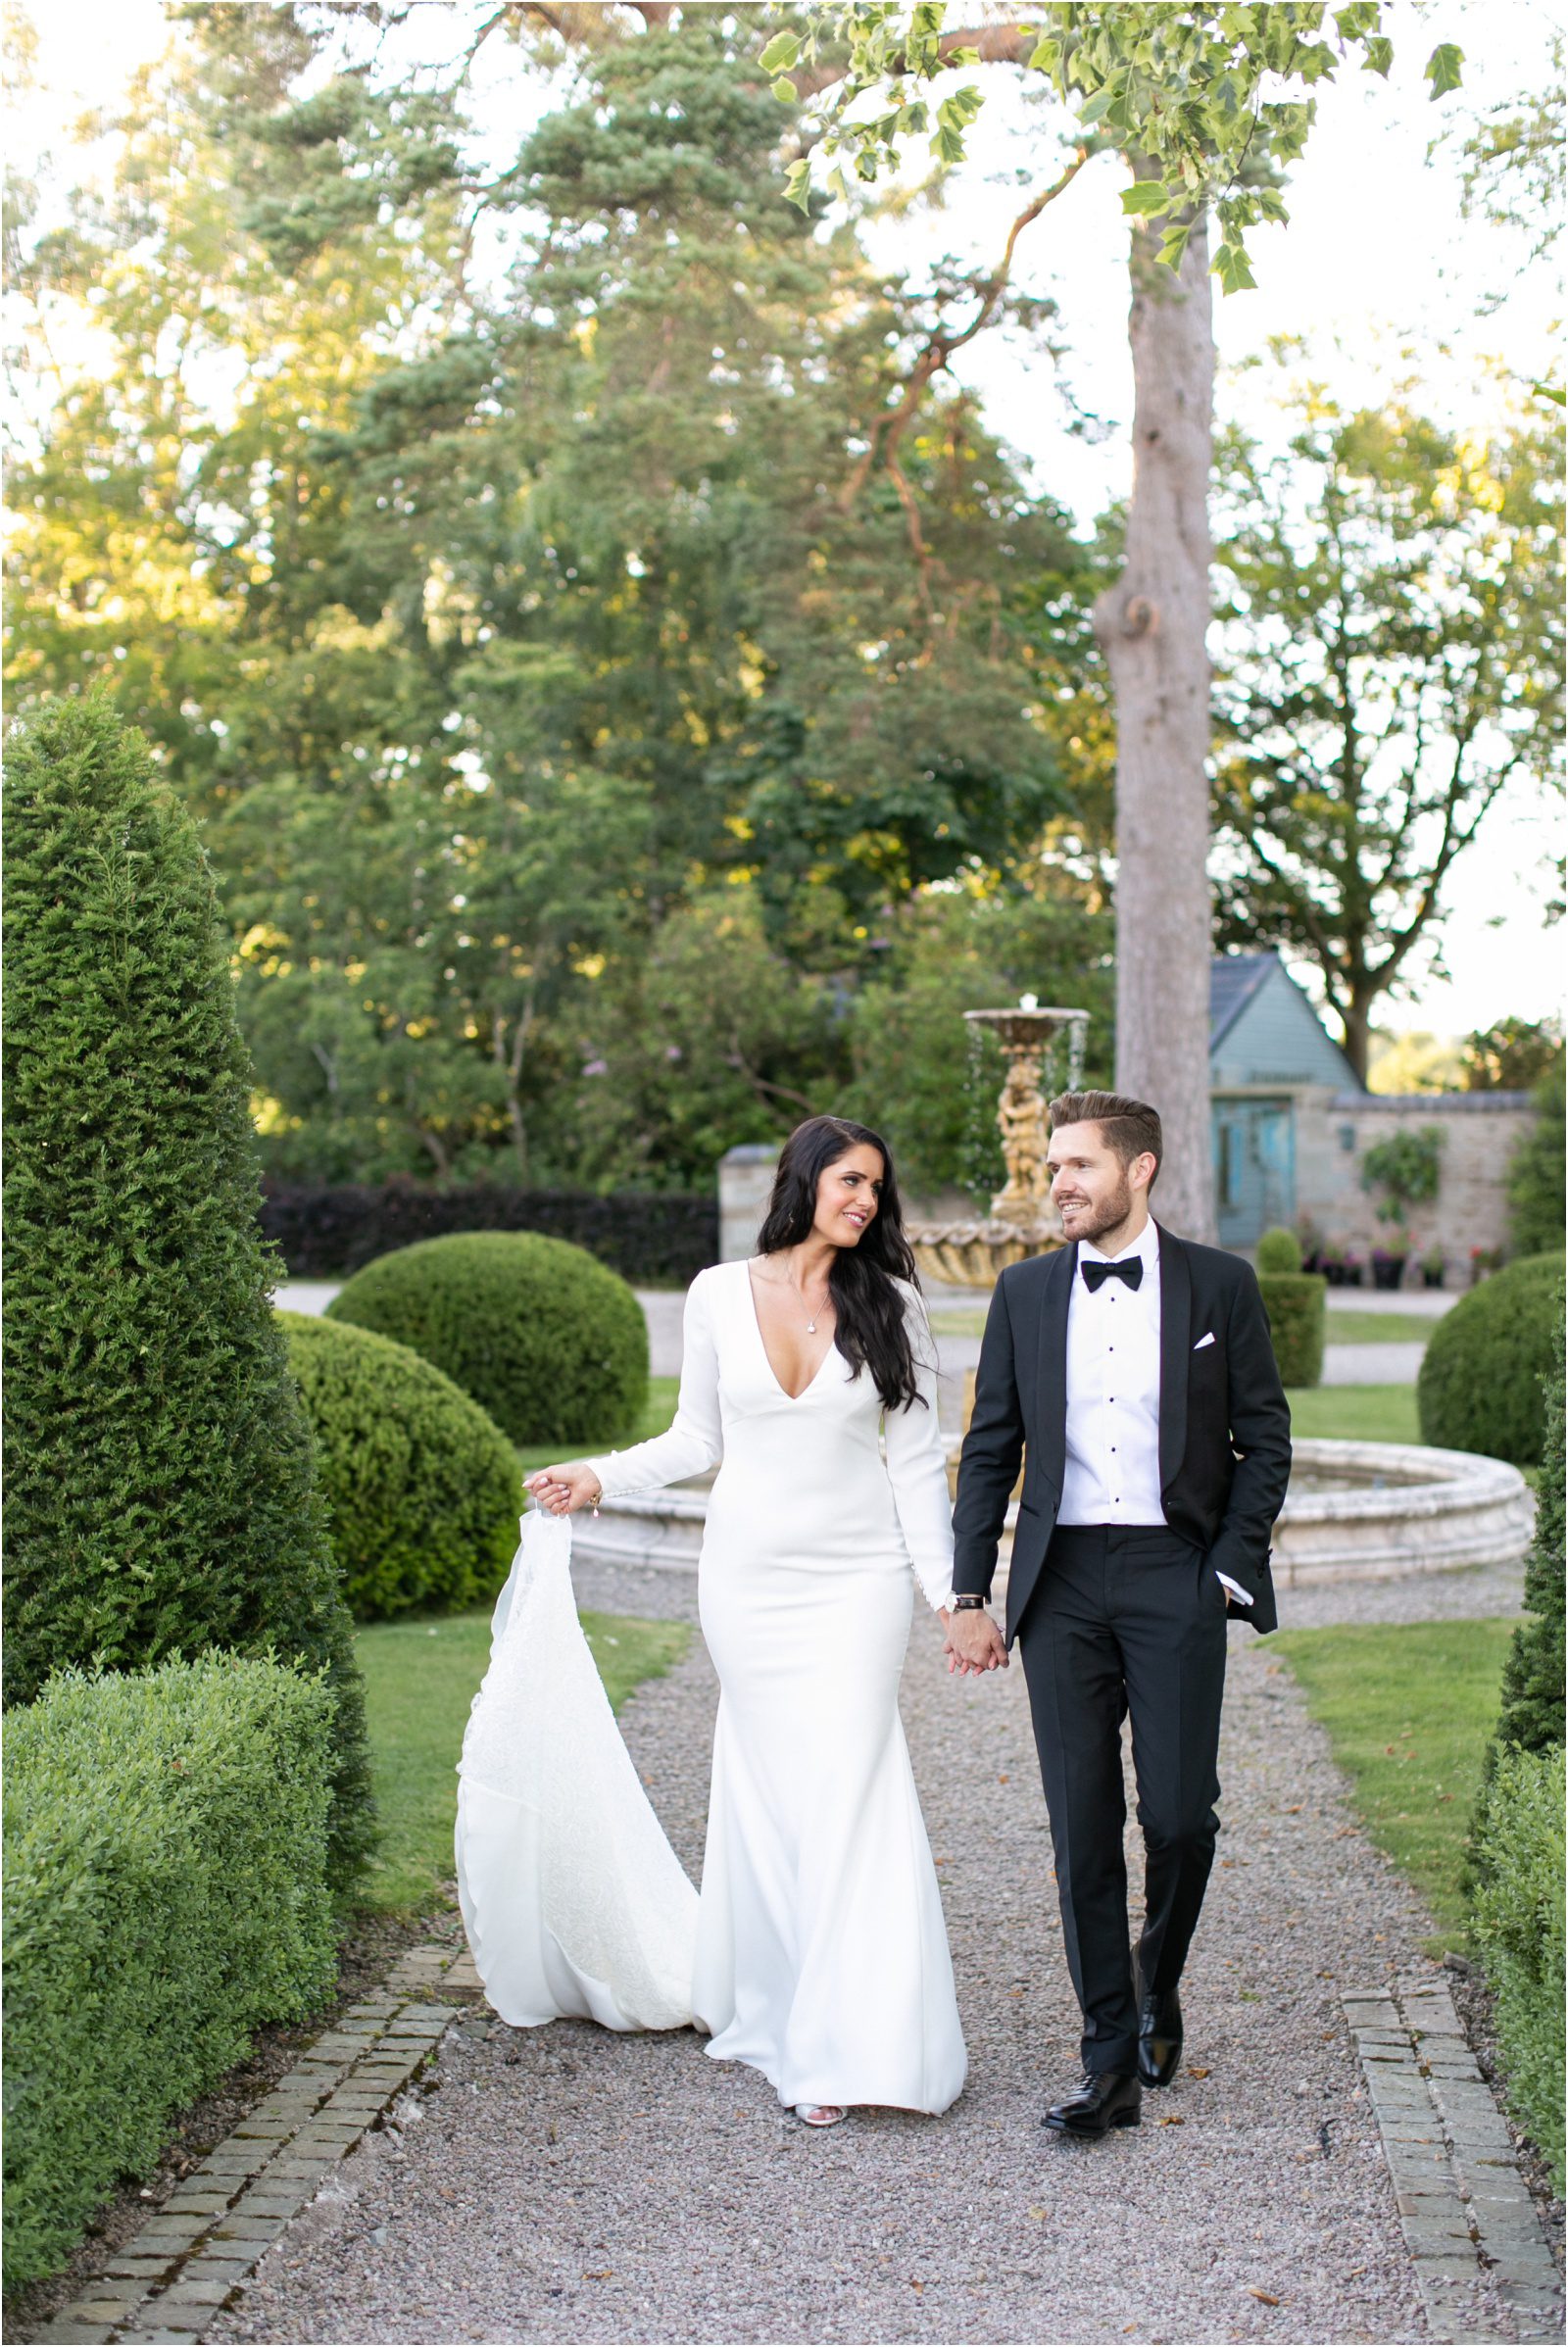 Sunset photos at Lemore Manor by Anneli Marinovich